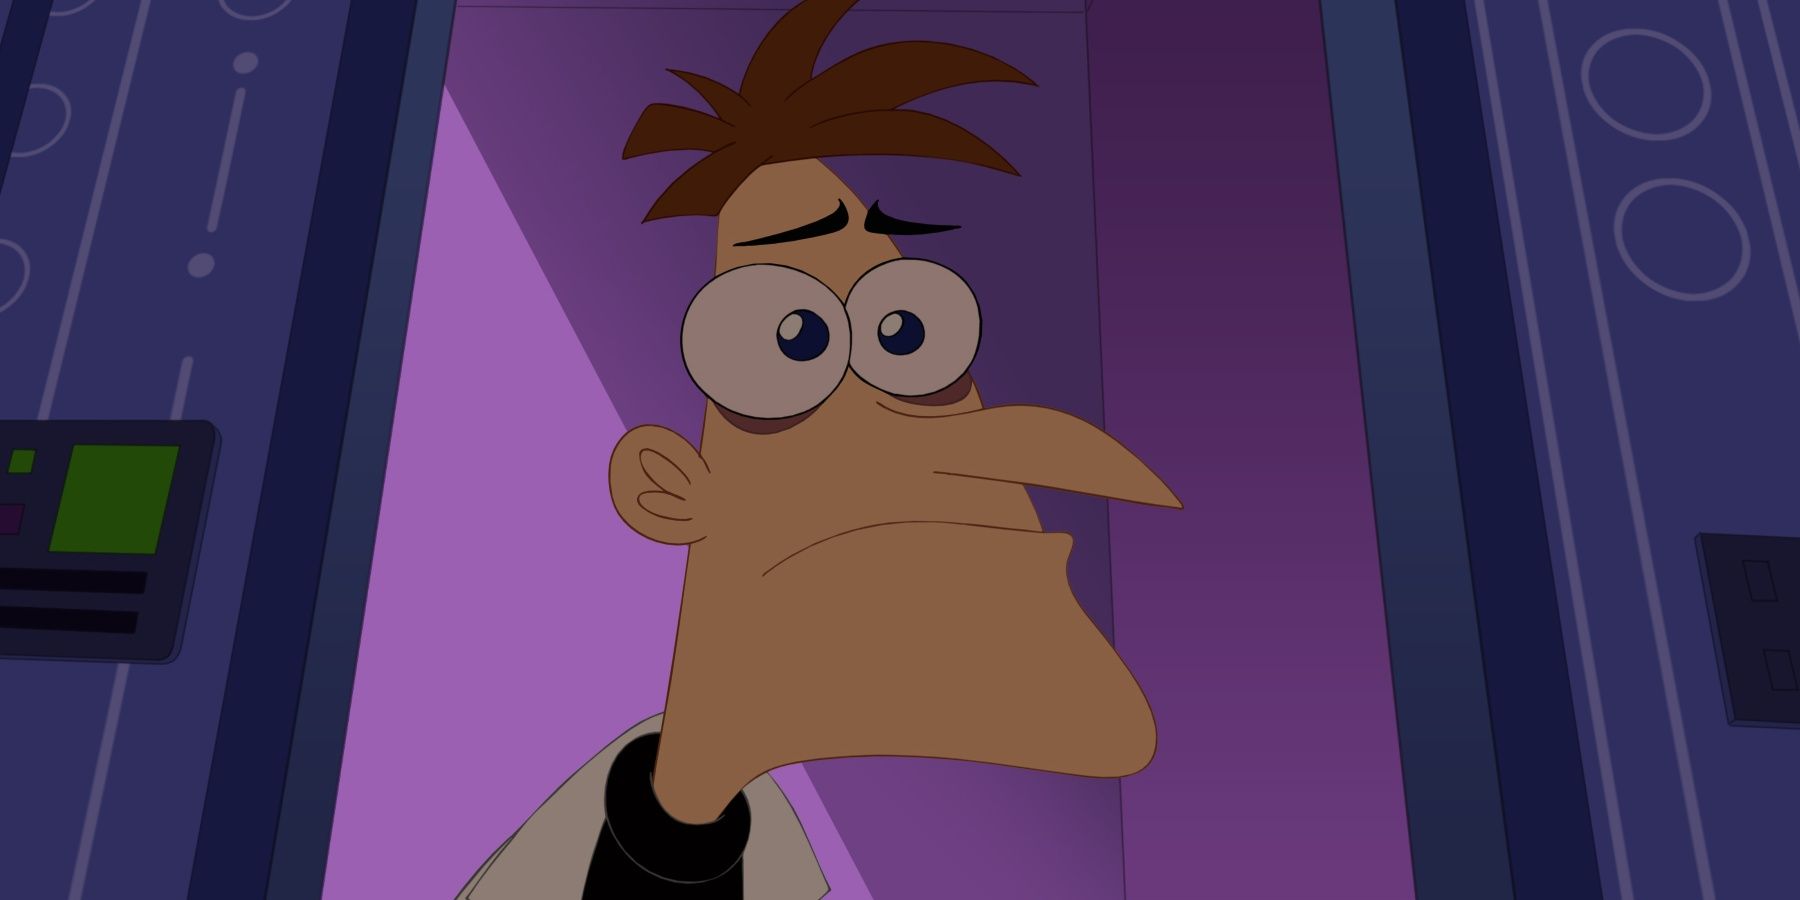 Disney Channels Phineas And Ferb Characters Ranked By Intelligence